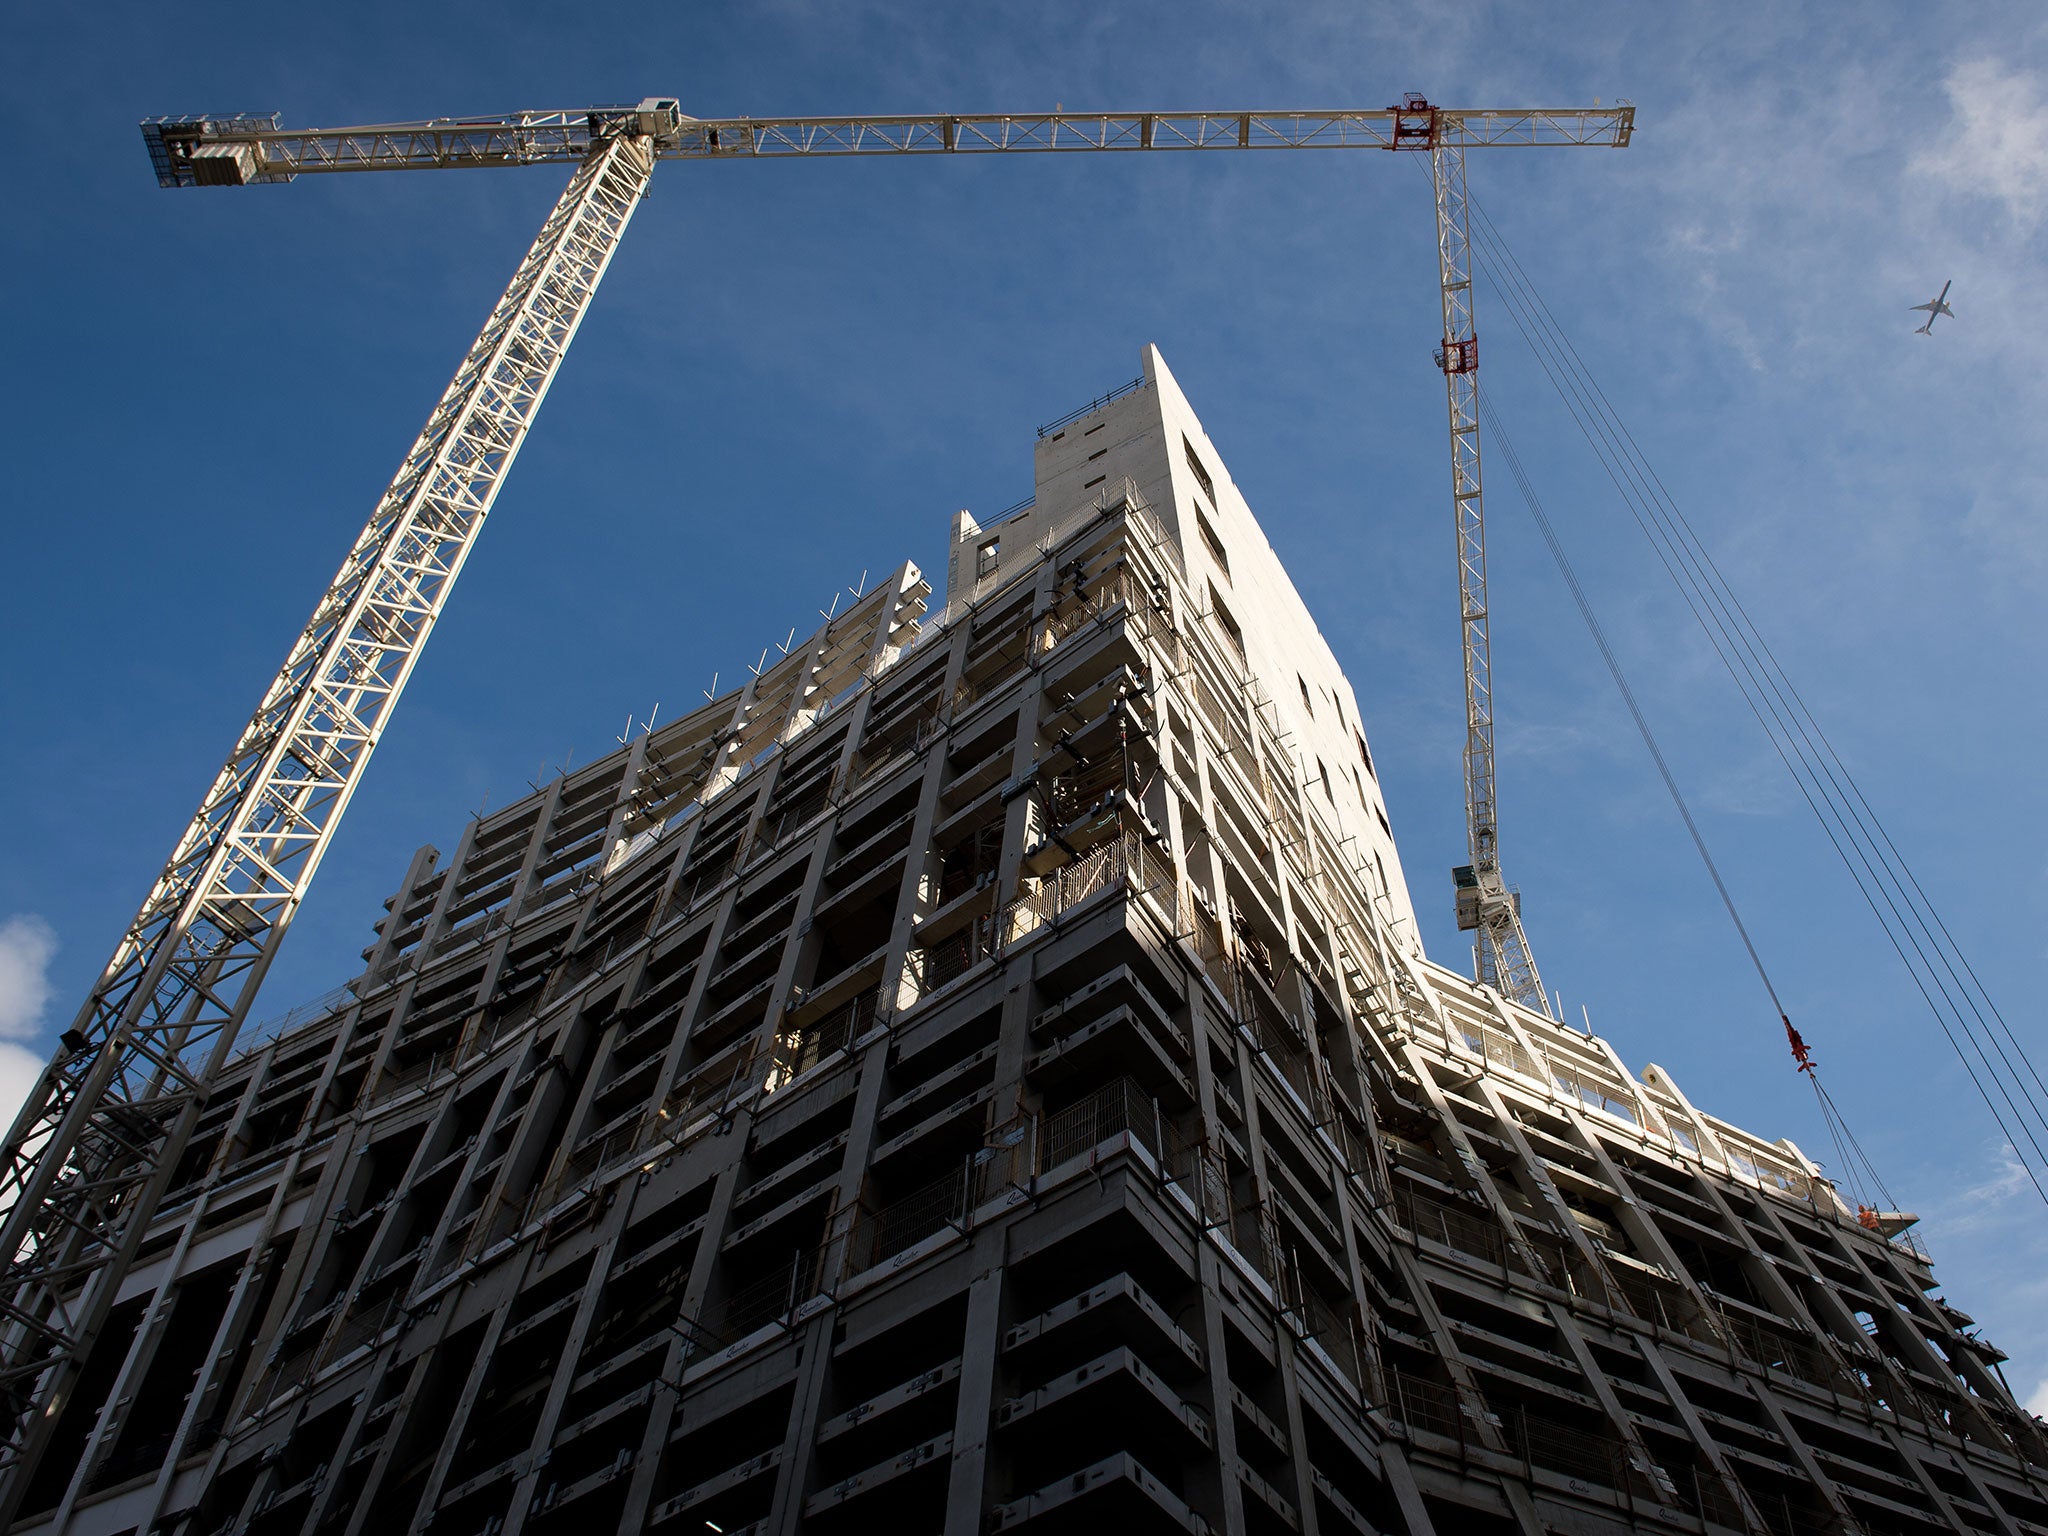 SIG provides material to the construction industry